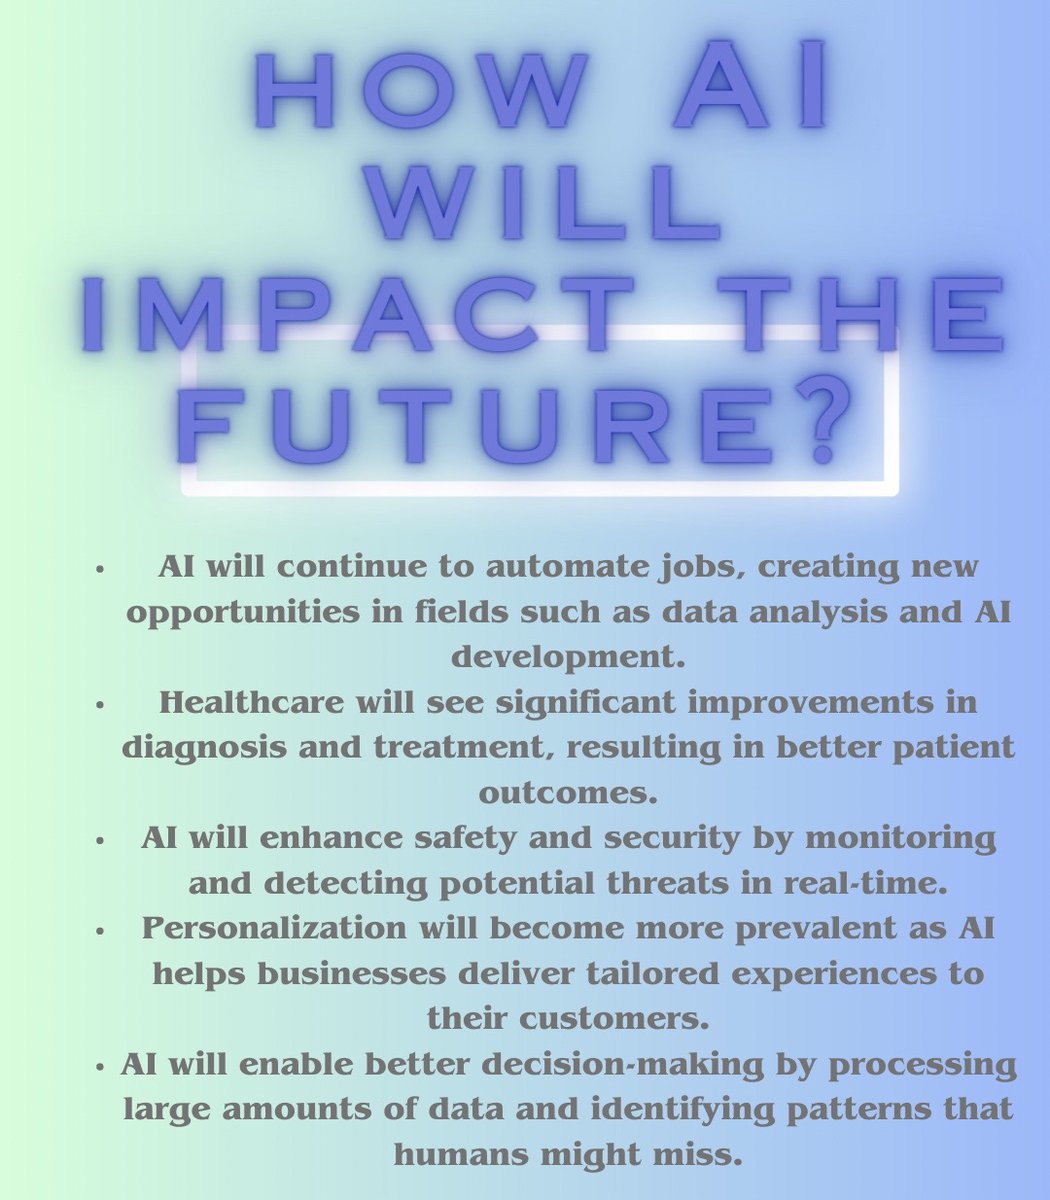 Transforming #Industries and Enabling Innovation: The Revolutionary Impact of #AI on the #Future 

#AIimpact #futuretech #innovativeAI #digitaltransformation #artificialintelligence #industry4.0 #futureofwork #AIrevolution #innovationhub #techinnovation #disruptivetechnologies